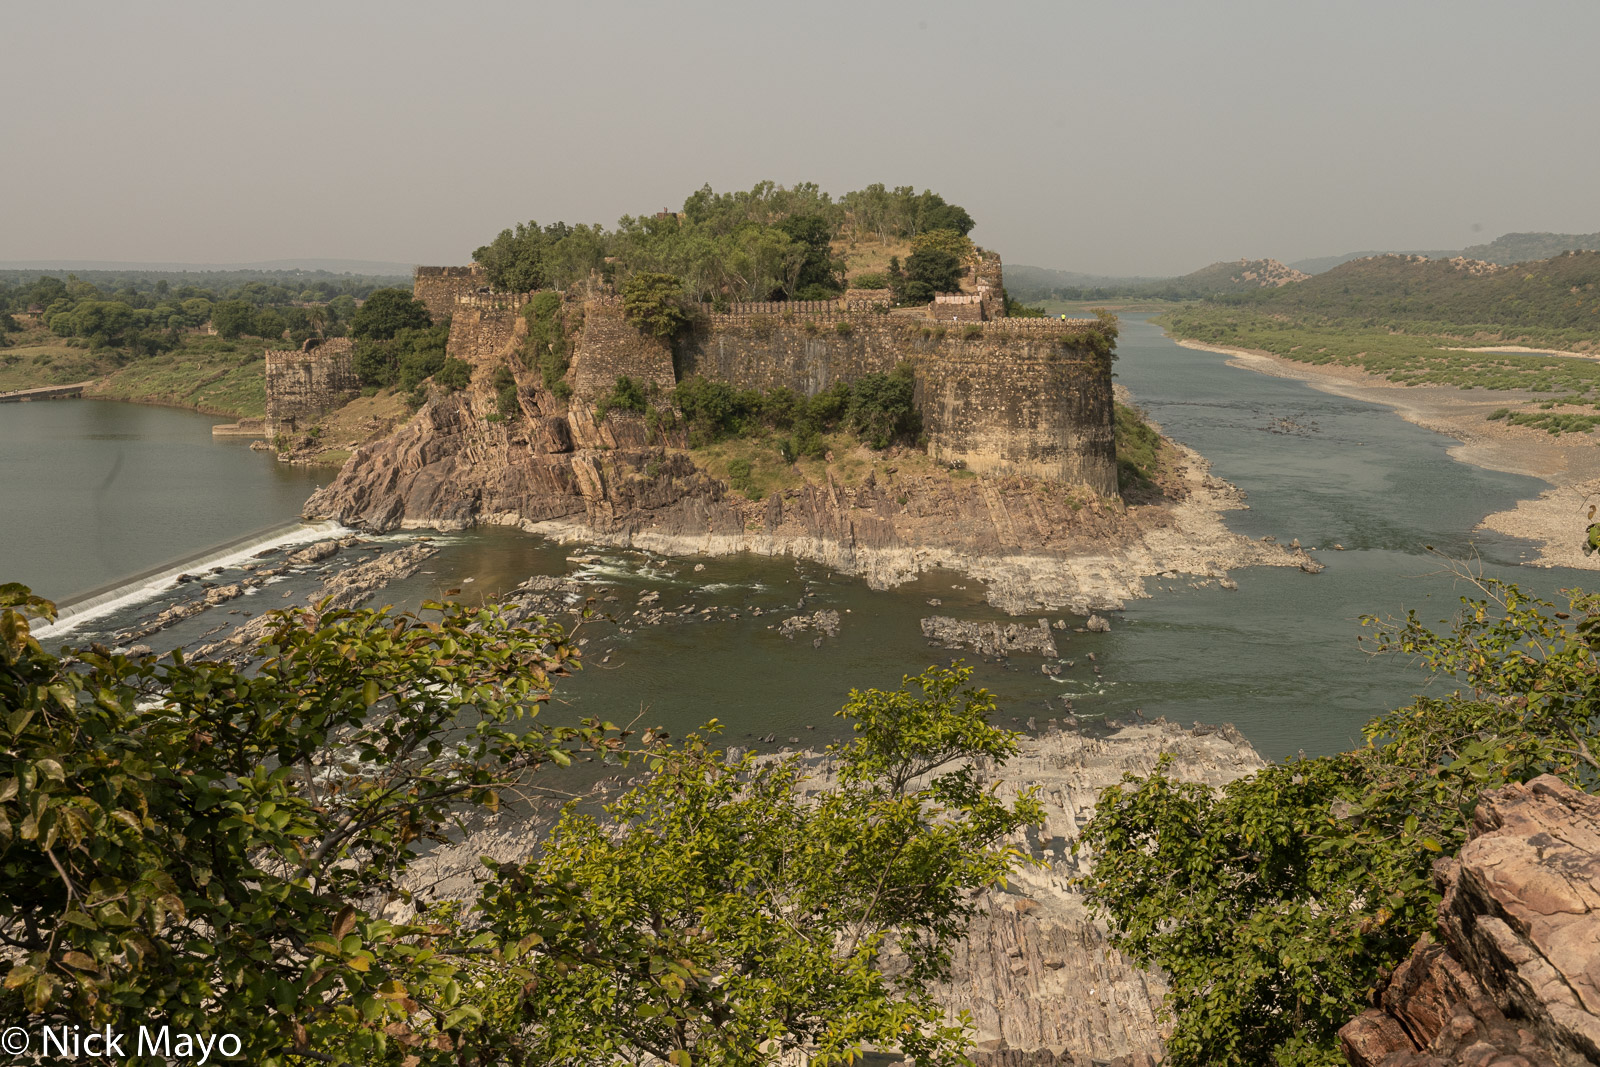 The UNESCO World Heritage listed Gagron fort in the Hodoti region.